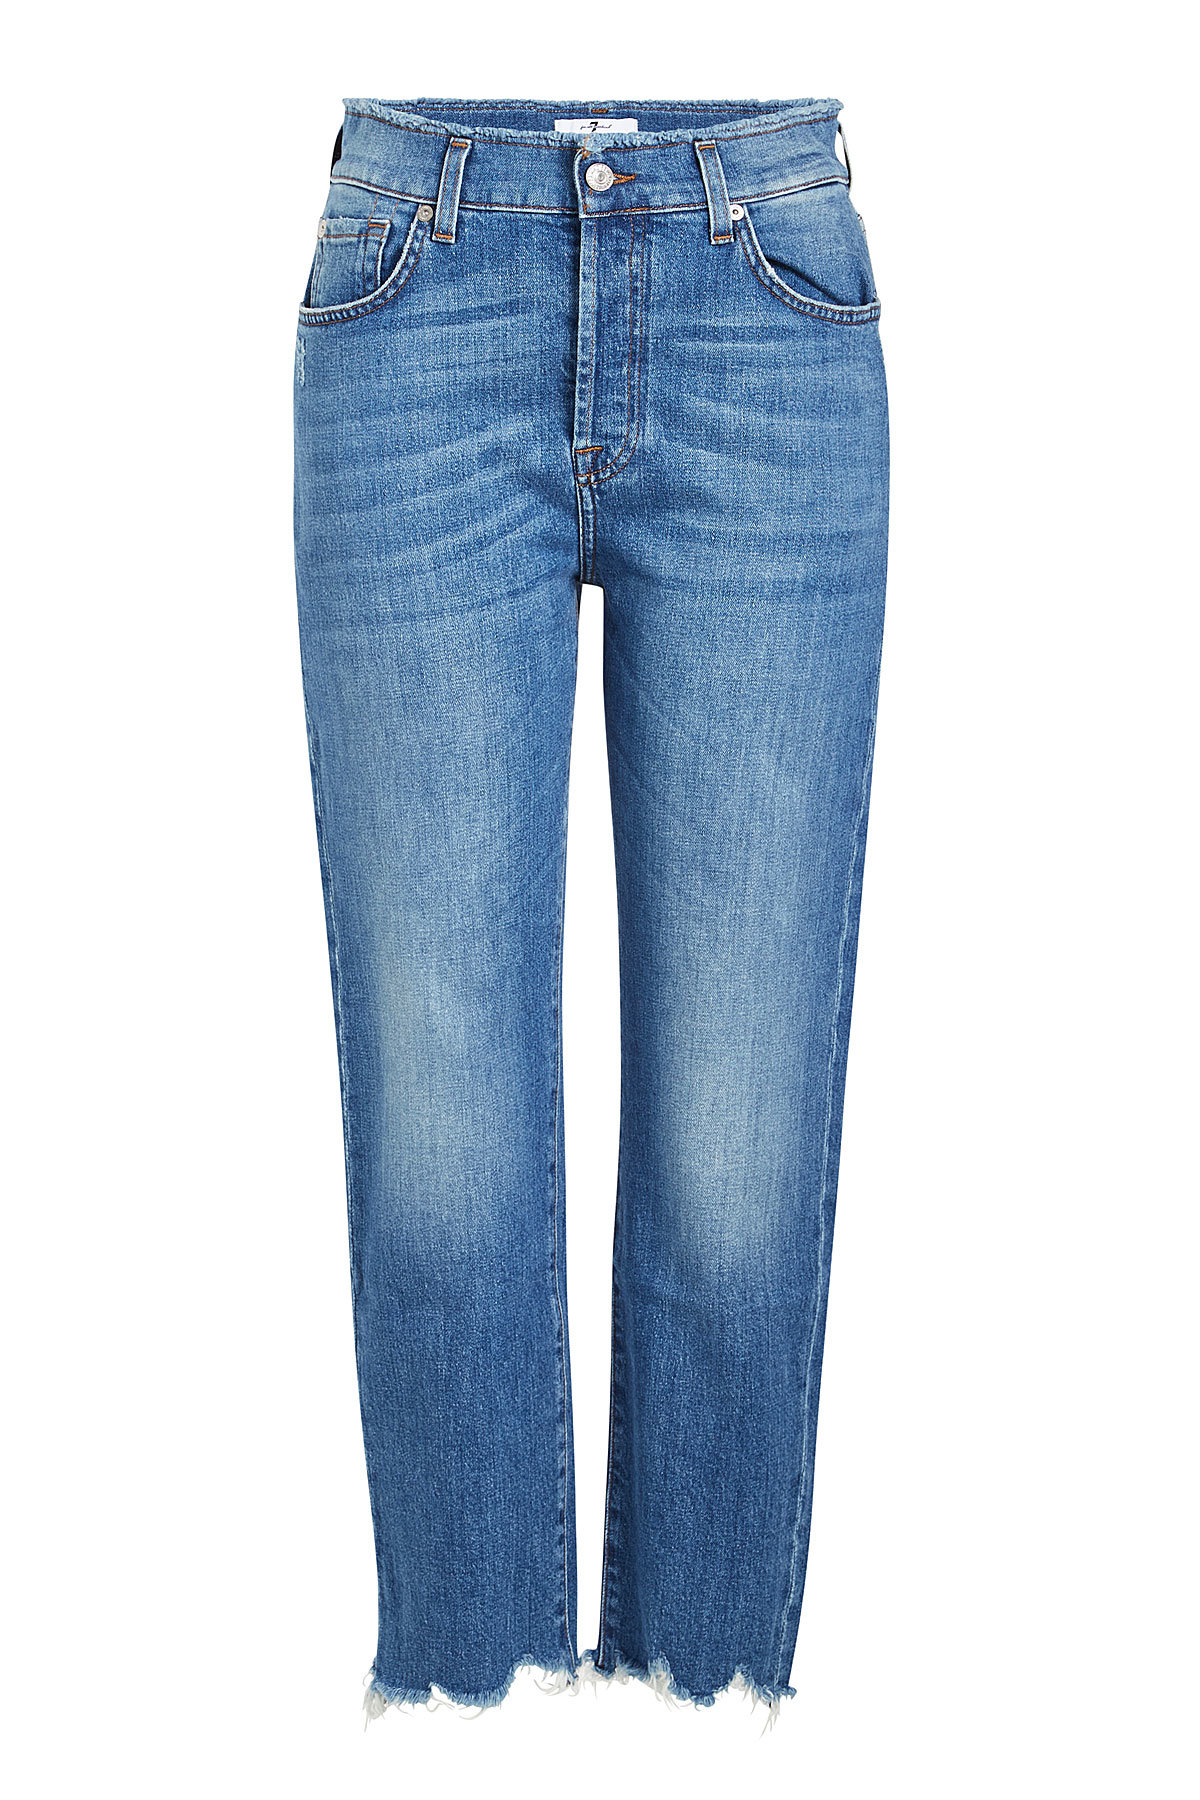 7 for All Mankind - High-Waisted Josefina Cropped Jeans